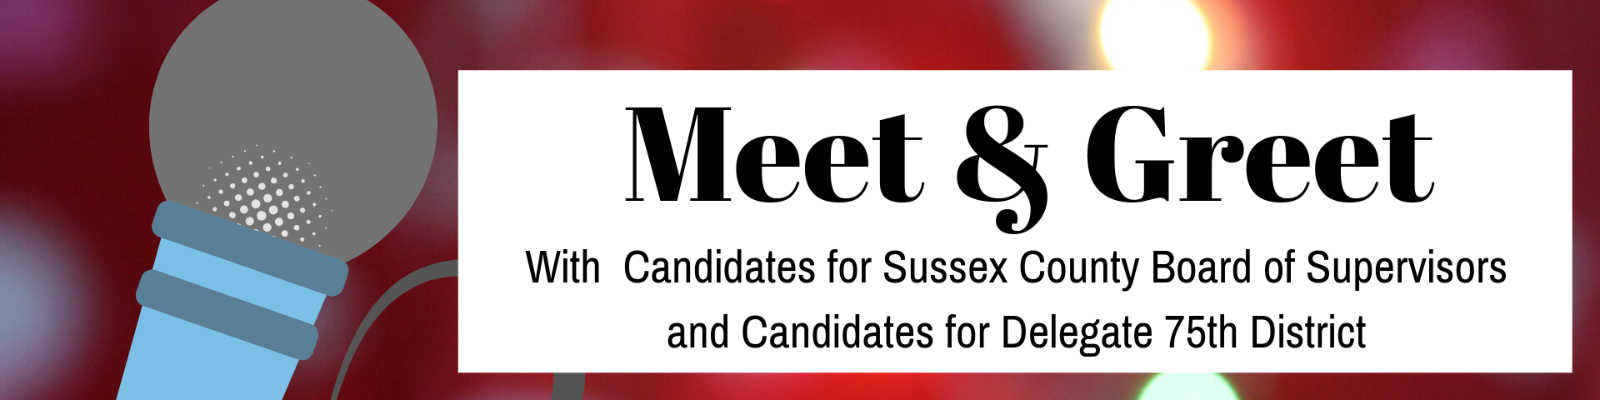 Meet & Greet with Candidates for Sussex Board of Supervisors and Candidates for Delegate in the 75th District